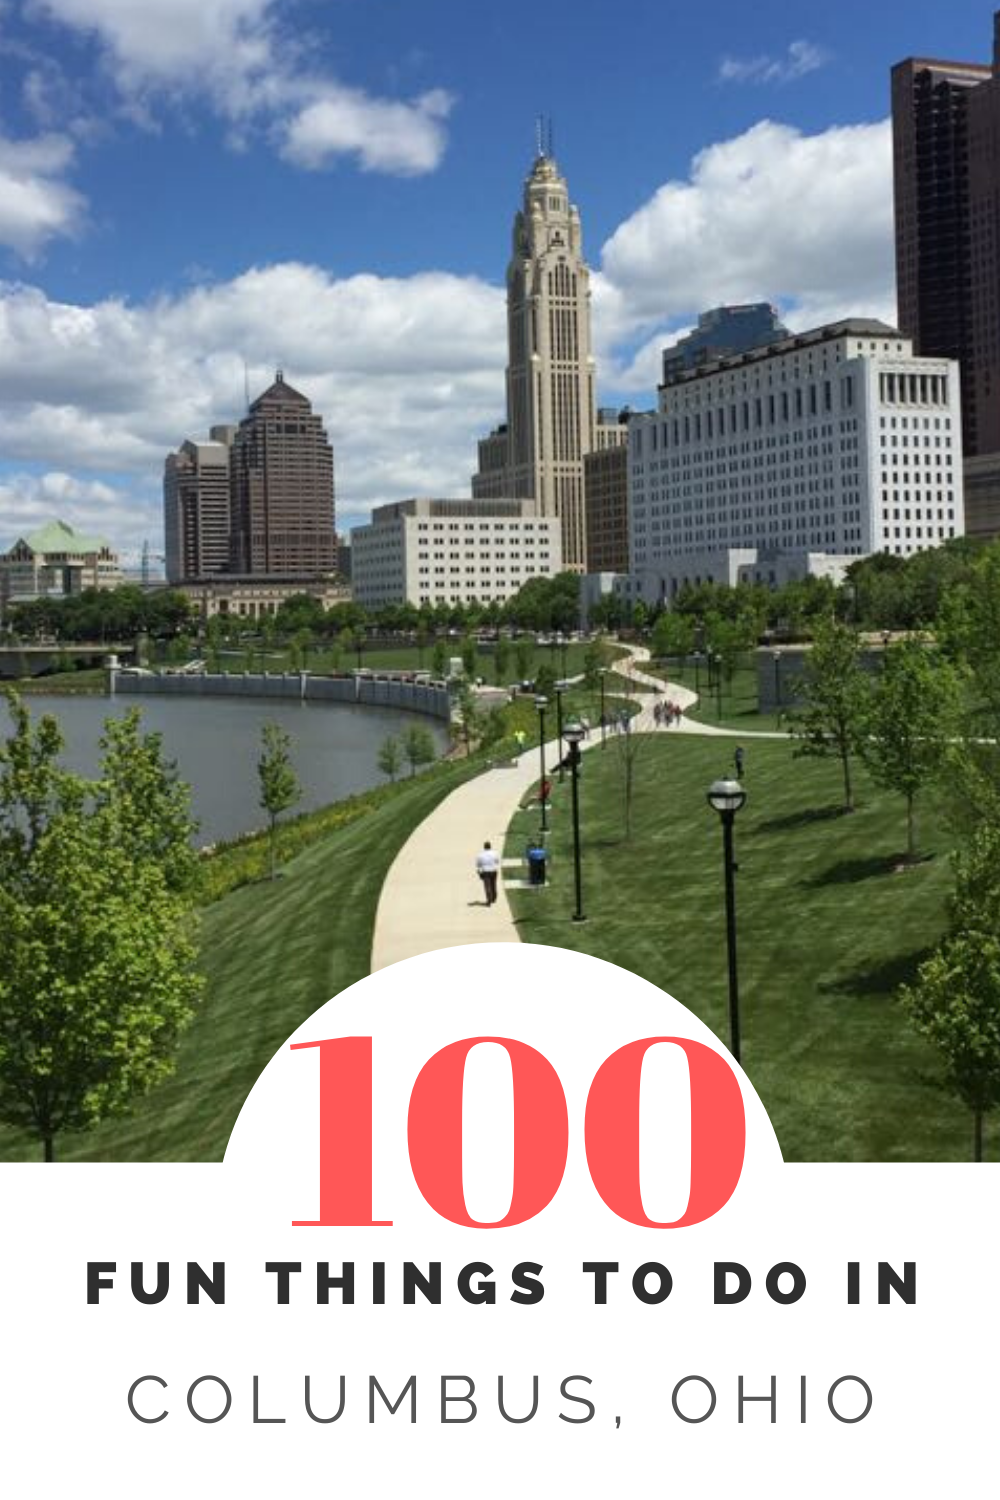 Over 100 Fun Things to do in Columbus, Ohio